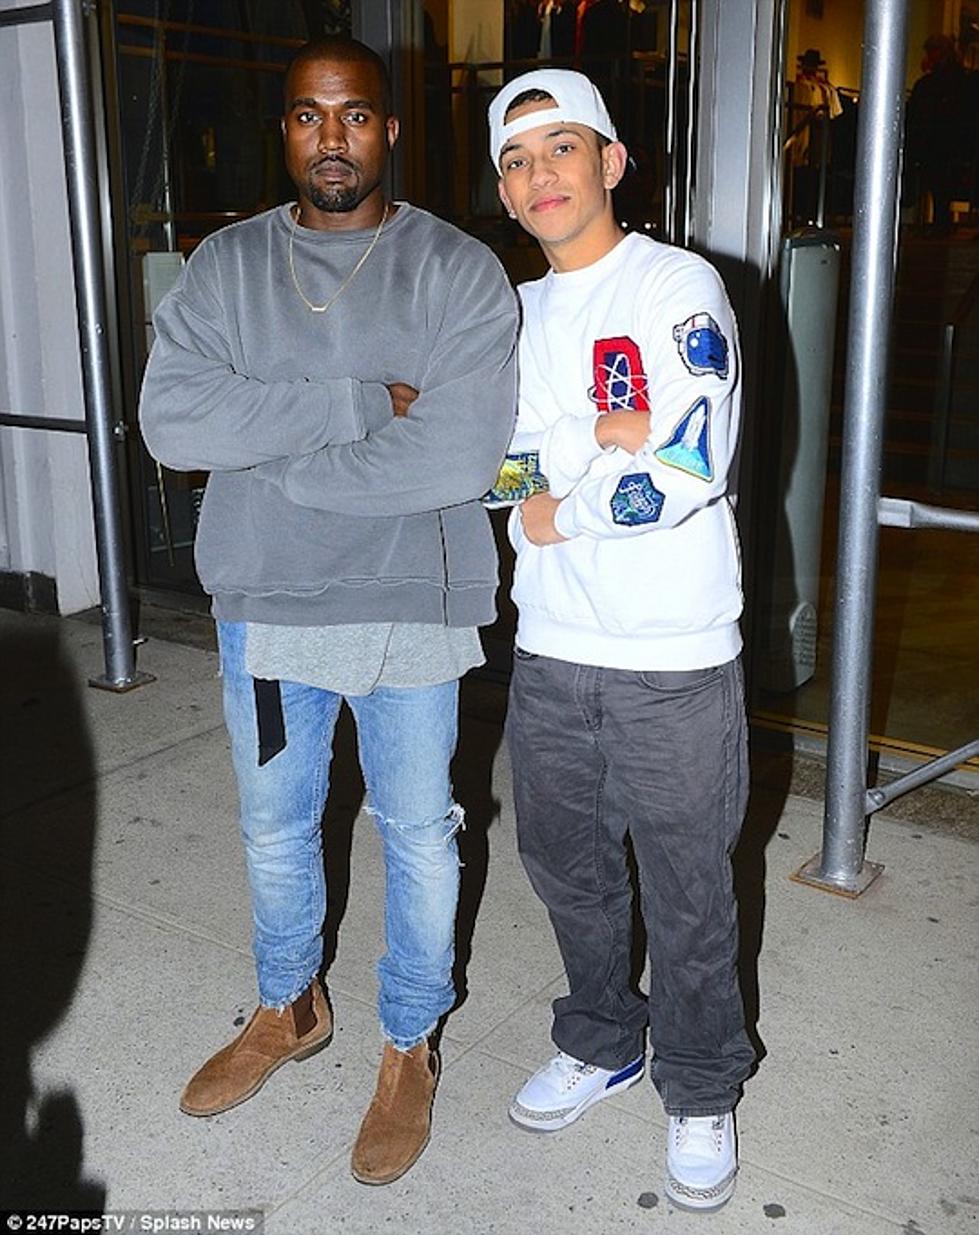 Shirt Worn By Pap In Photo With Kanye West Quickly Sells Out